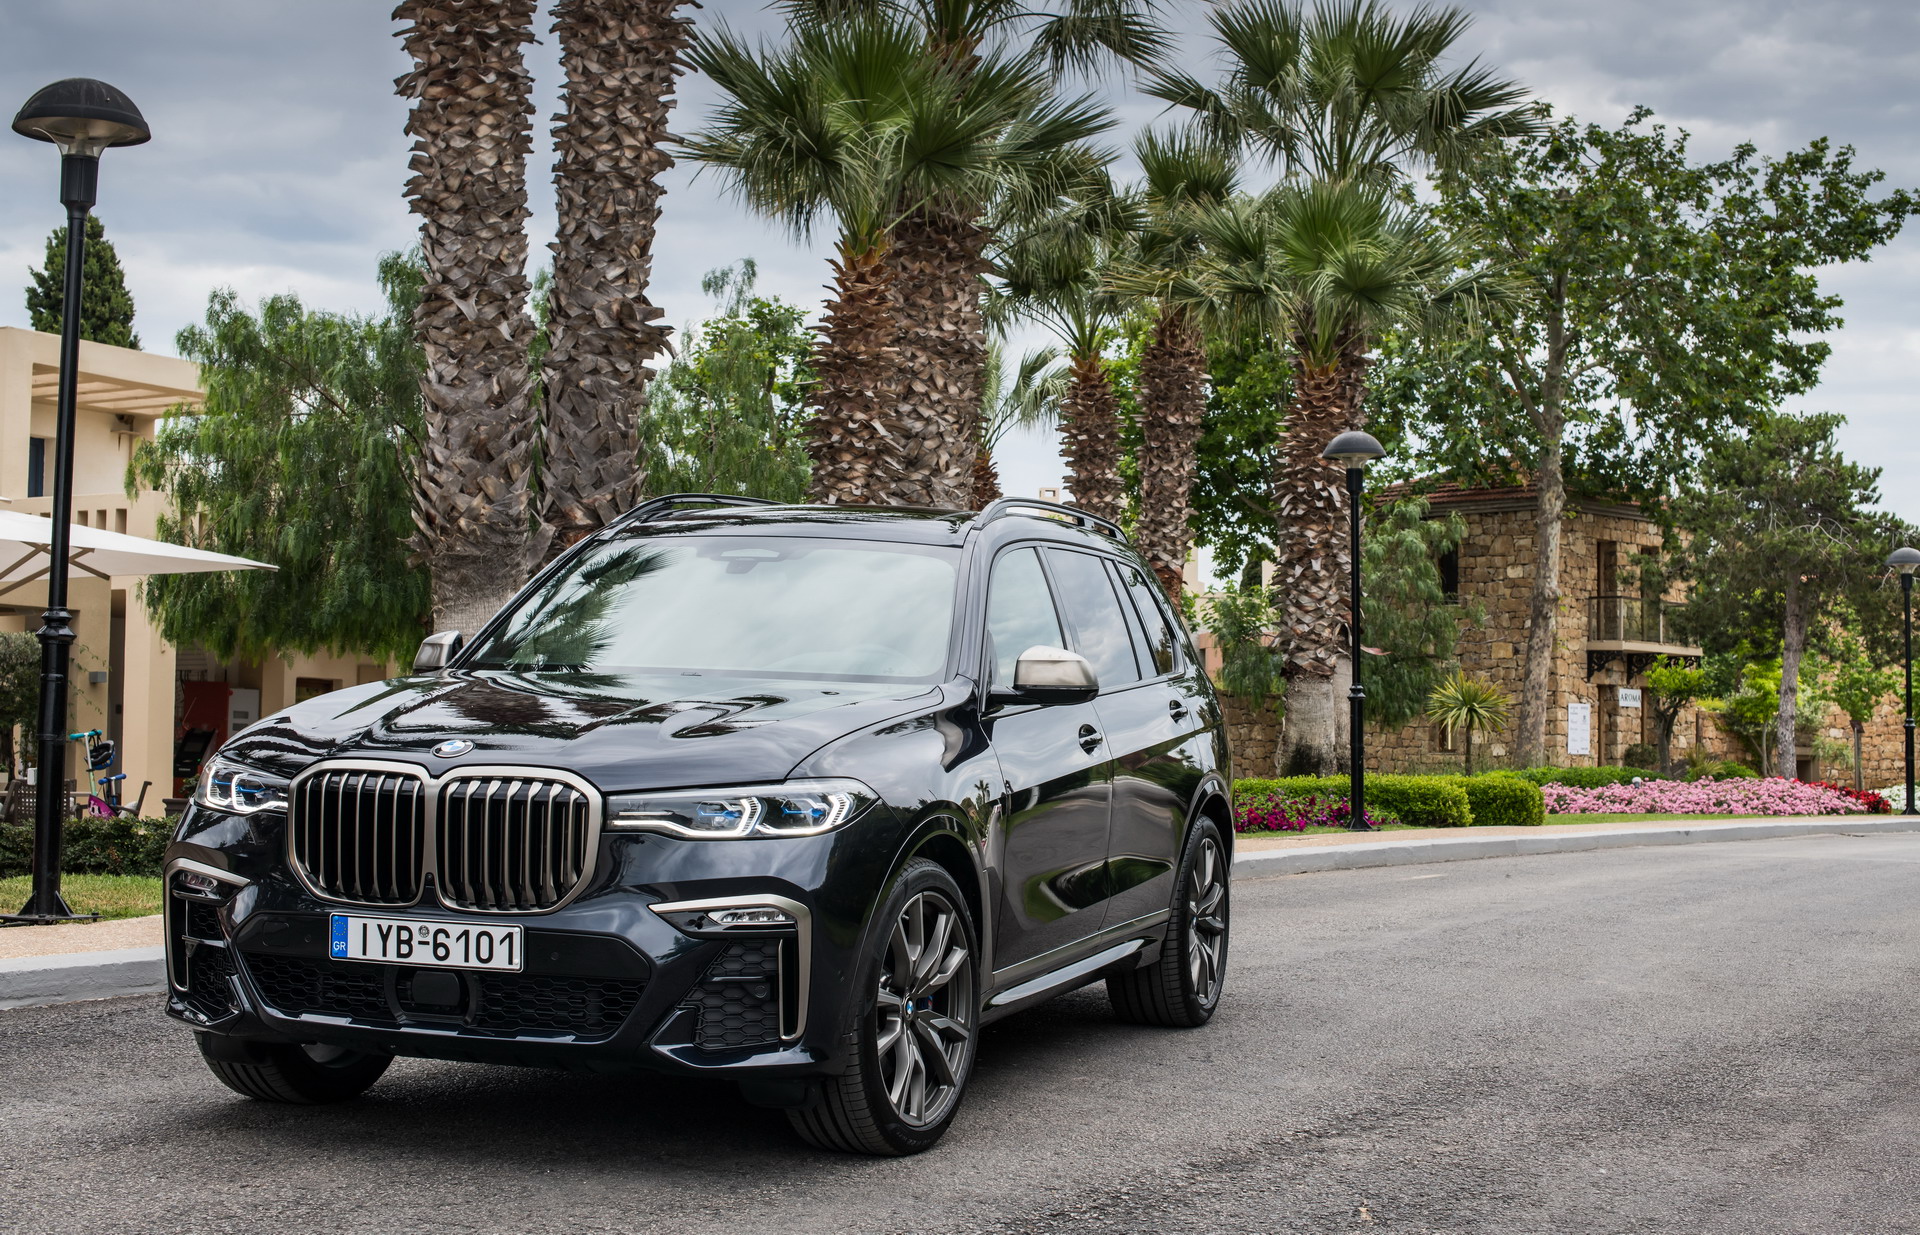 PHOTO GALLERY: BMW X7 M50d takes a journey in the picturesque Greece. 